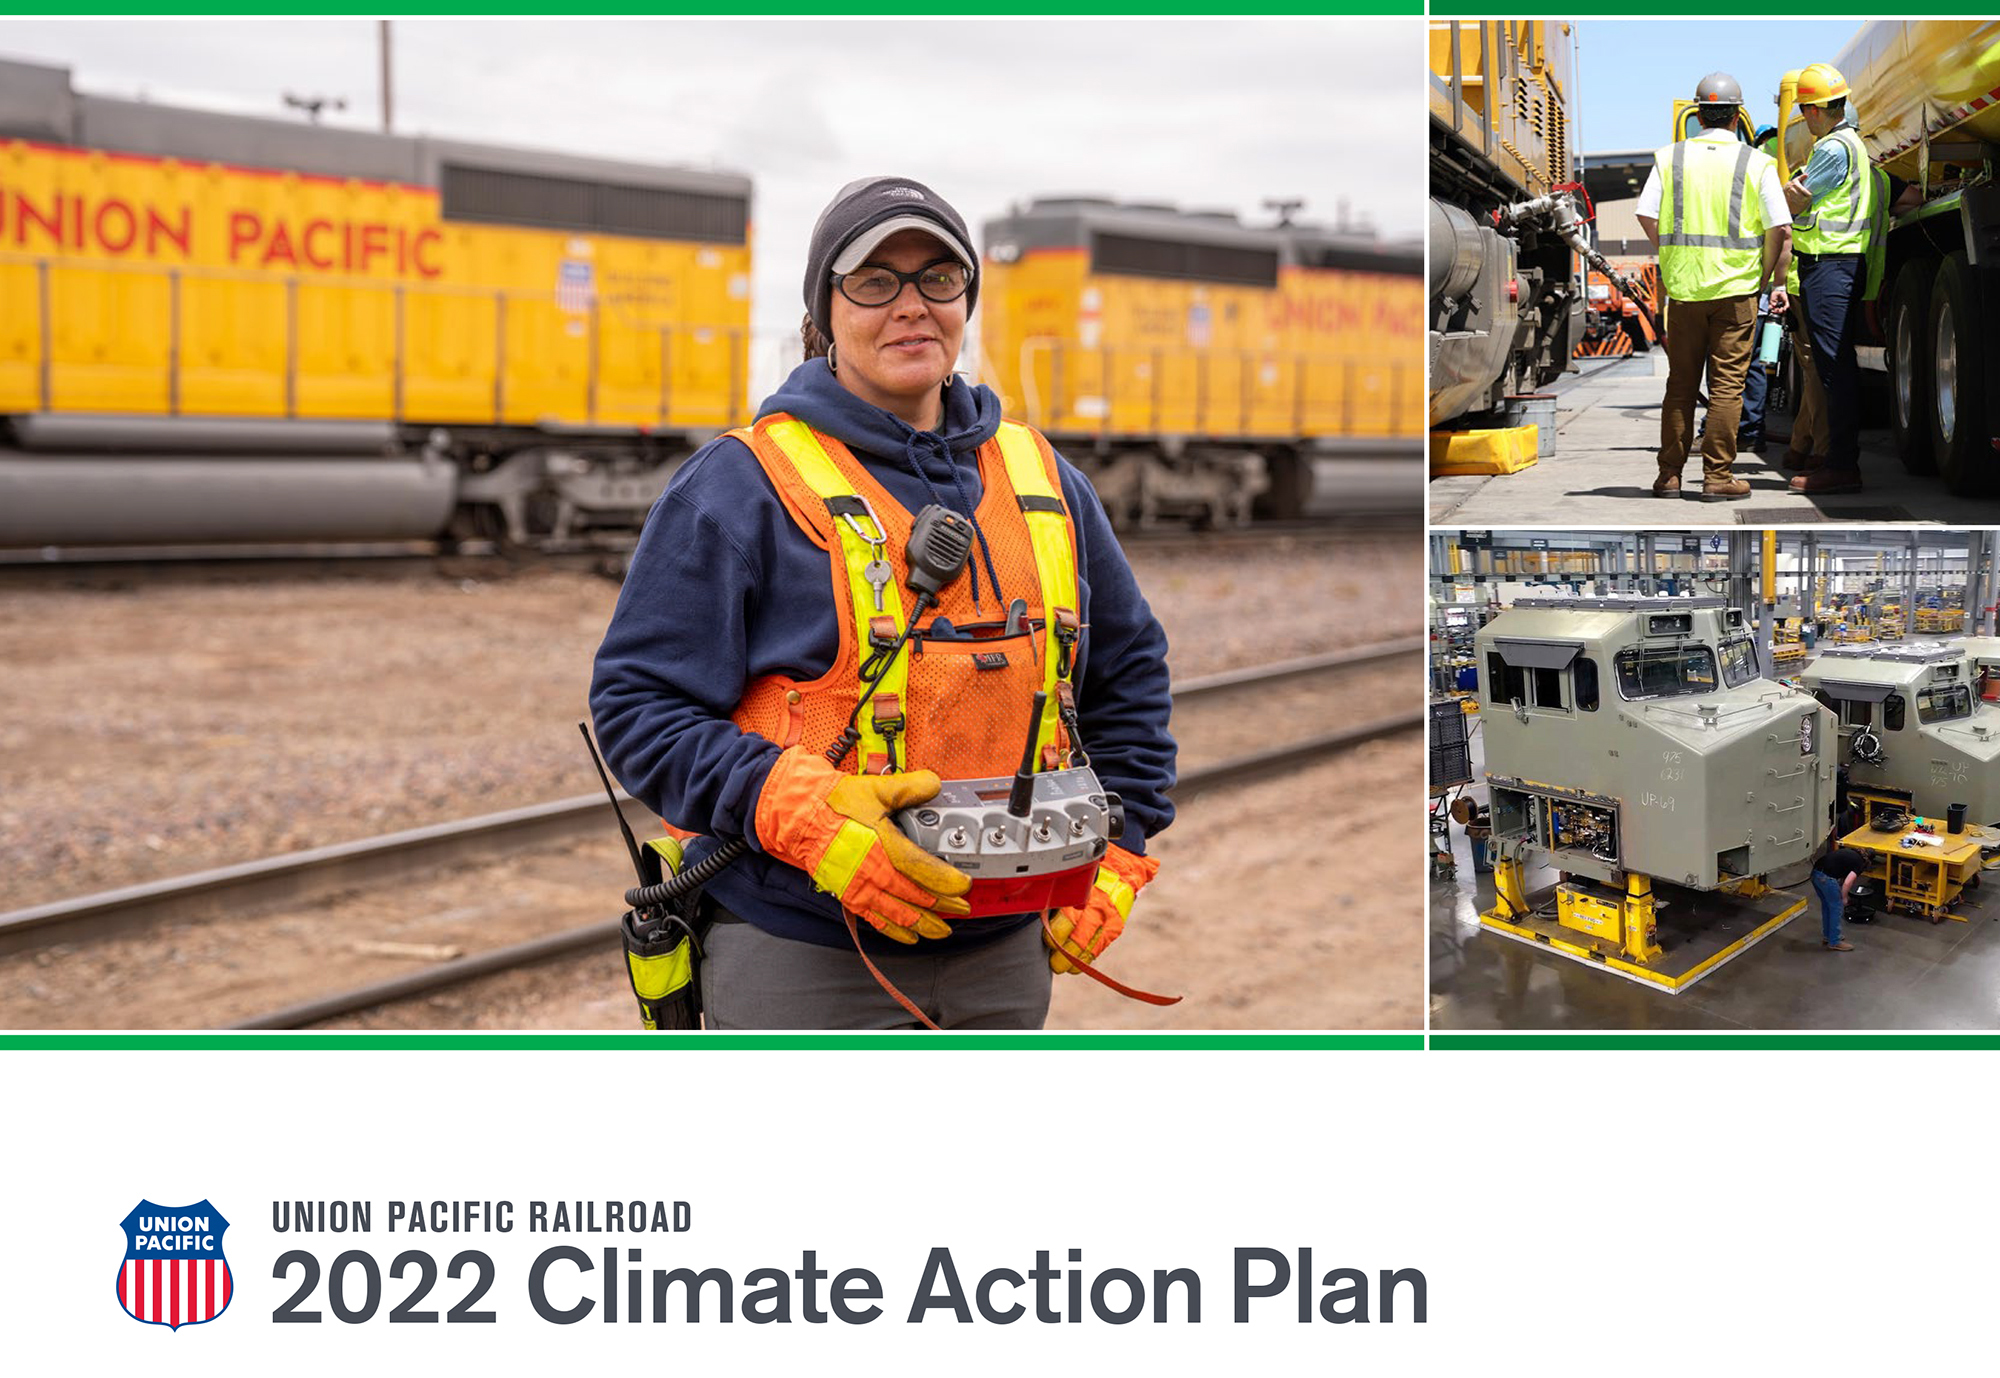 UP: 2022 Climate Action Plan Provides Updates on Union Pacific's